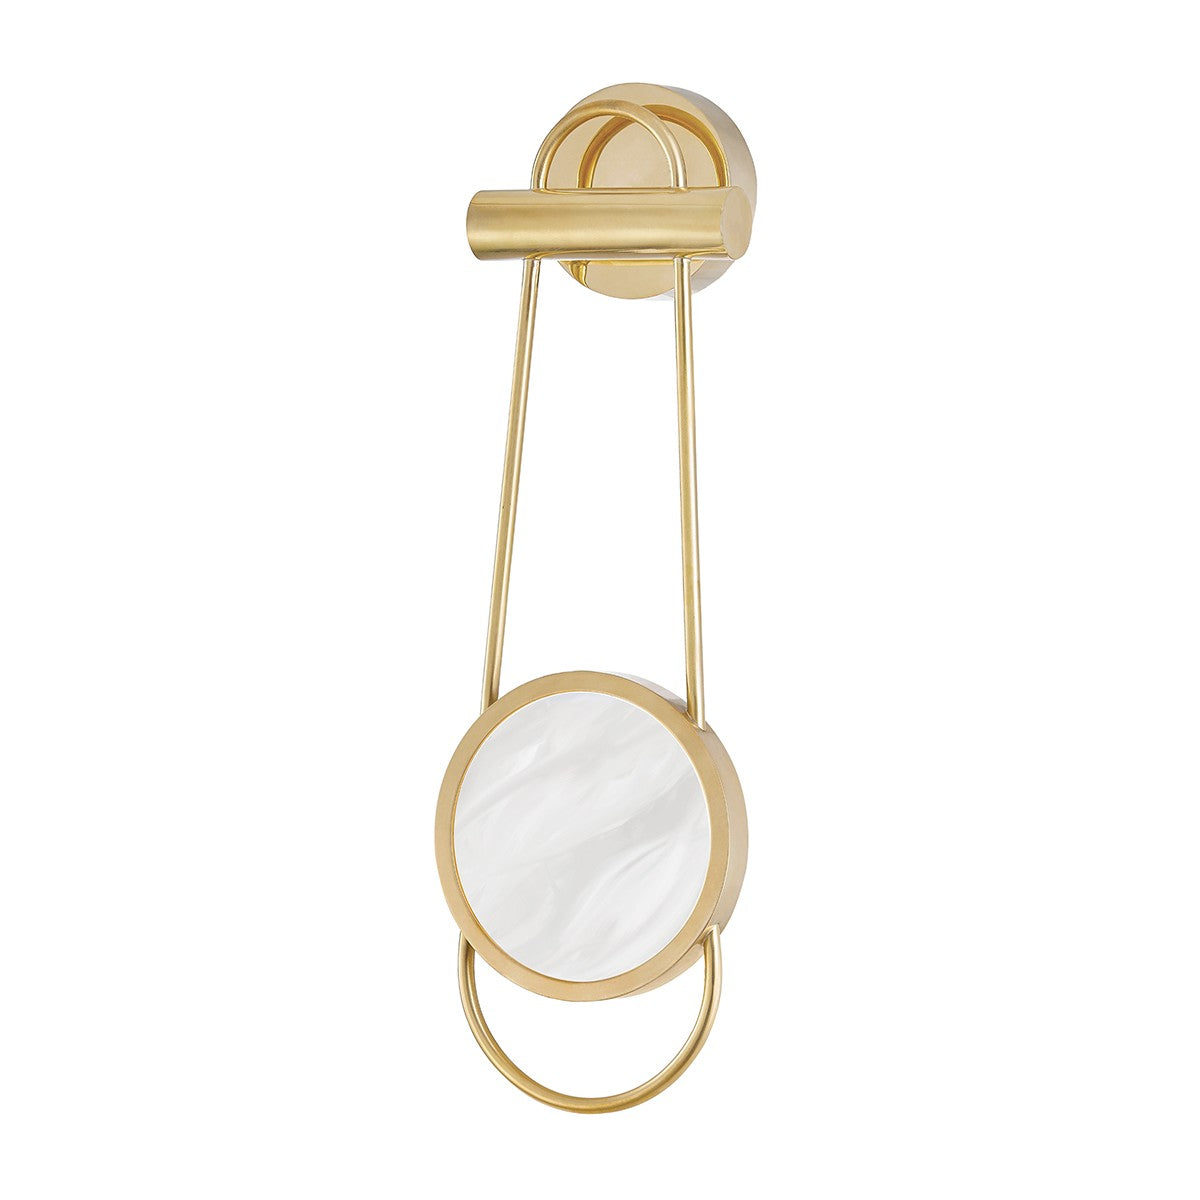 Hudson Valley - 8721-AGB - LED Wall Sconce - Jervis - Aged Brass